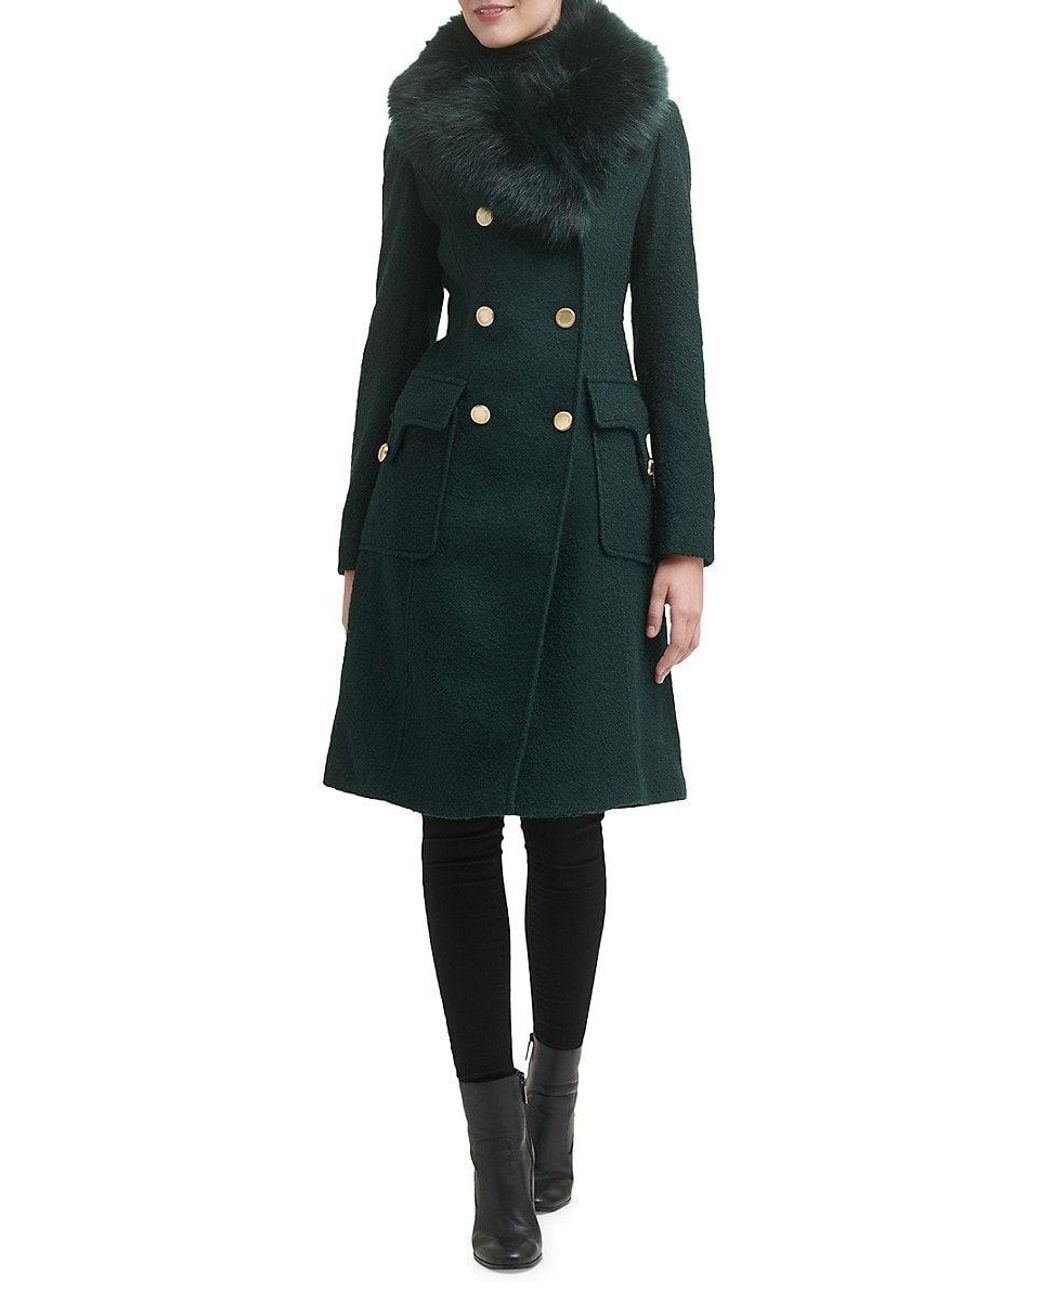 Guess Faux Fur Trim Double Breasted Coat in Green | Lyst